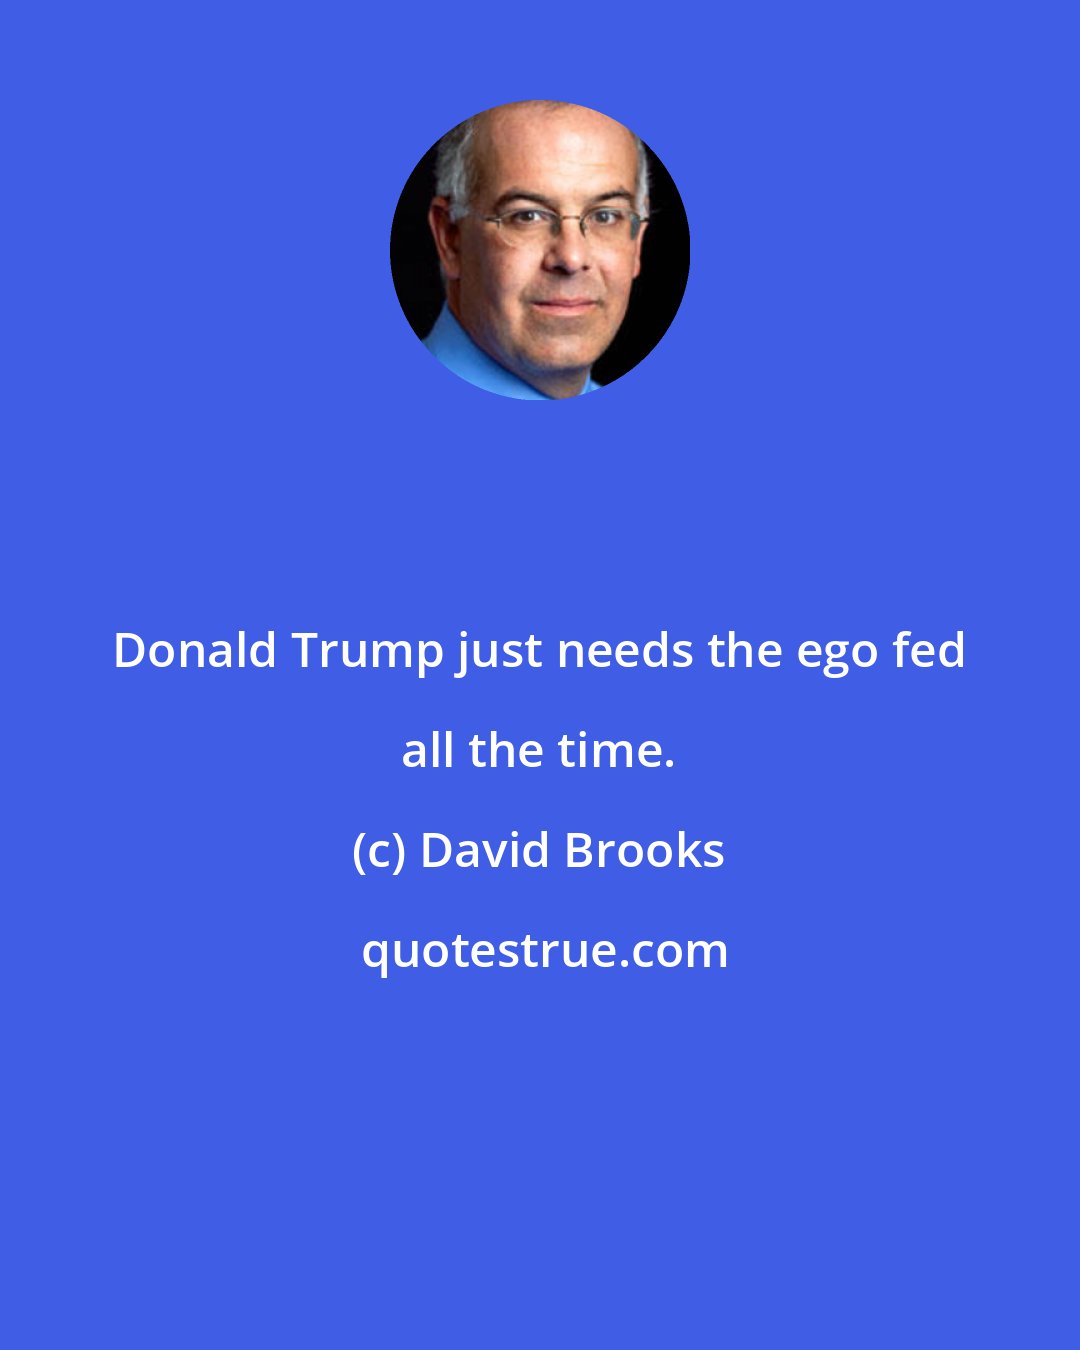 David Brooks: Donald Trump just needs the ego fed all the time.